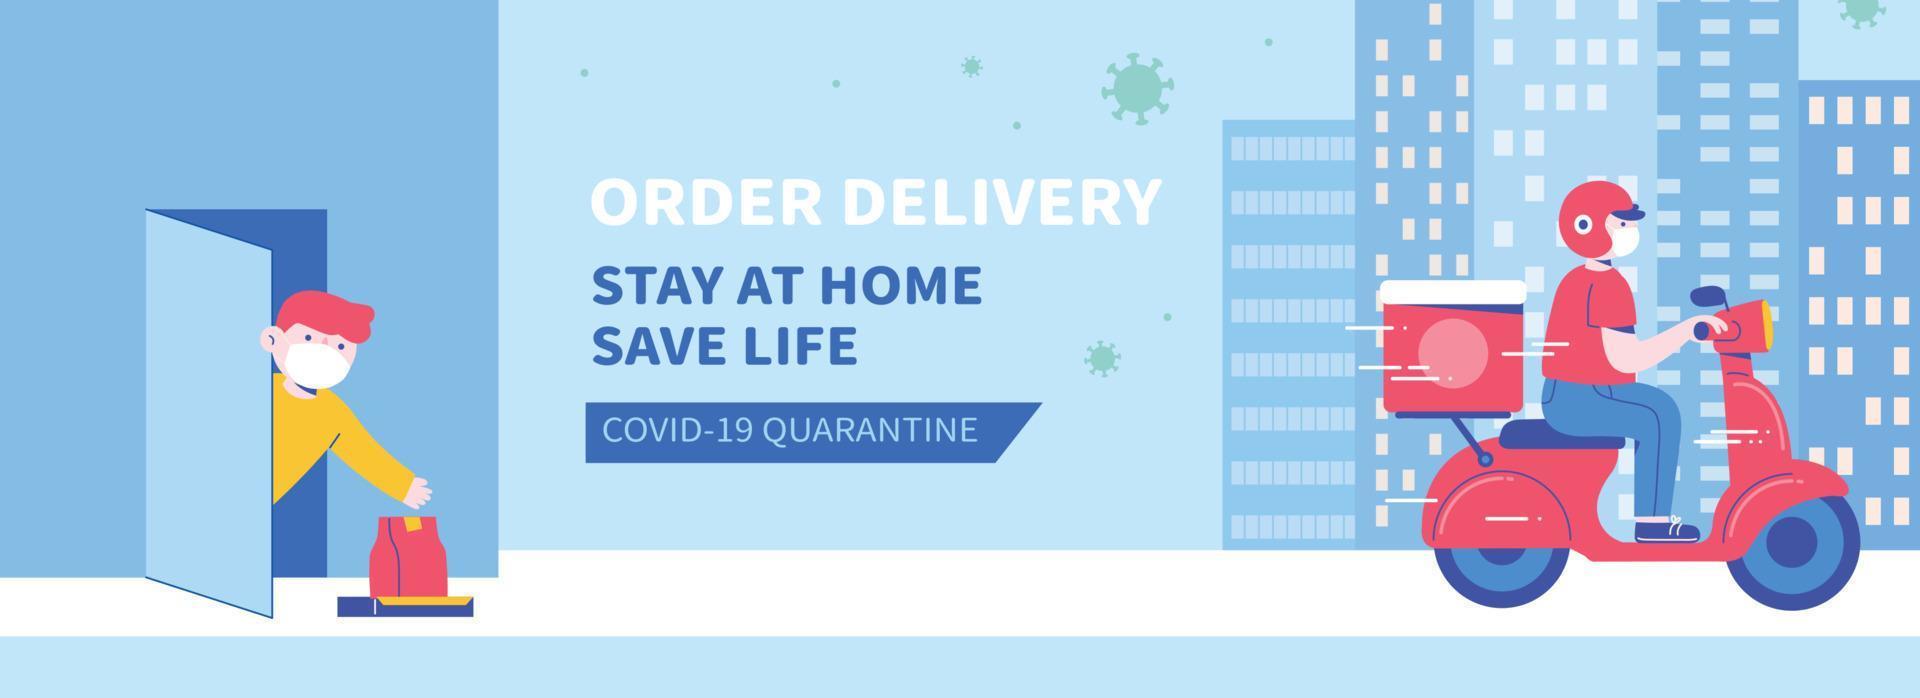 Concept of no contact food delivery, with courier offering a drop-off without physical contact during COVID-19 quarantine vector